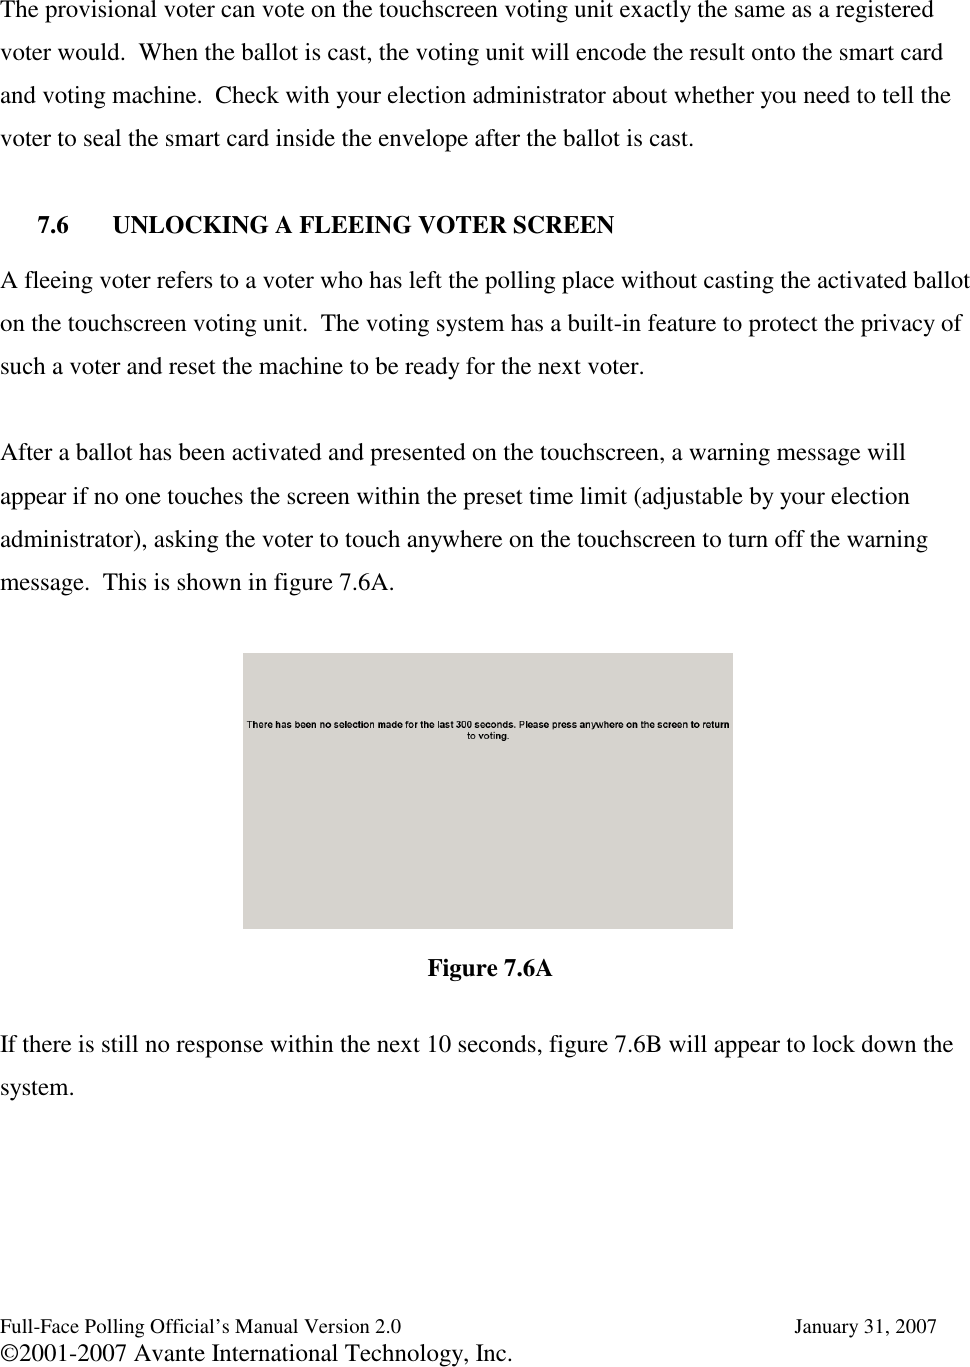 Full-Face Polling Official’s Manual Version 2.0 January 31, 2007©2001-2007 Avante International Technology, Inc.The provisional voter can vote on the touchscreen voting unit exactly the same as a registeredvoter would. When the ballot is cast, the voting unit will encode the result onto the smart cardand voting machine. Check with your election administrator about whether you need to tell thevoter to seal the smart card inside the envelope after the ballot is cast.7.6 UNLOCKING A FLEEING VOTER SCREENA fleeing voter refers to a voter who has left the polling place without casting the activated balloton the touchscreen voting unit. The voting system has a built-in feature to protect the privacy ofsuch a voter and reset the machine to be ready for the next voter.After a ballot has been activated and presented on the touchscreen, a warning message willappear if no one touches the screen within the preset time limit (adjustable by your electionadministrator), asking the voter to touch anywhere on the touchscreen to turn off the warningmessage. This is shown in figure 7.6A.If there is still no response within the next 10 seconds, figure 7.6B will appear to lock down thesystem.Figure 7.6A